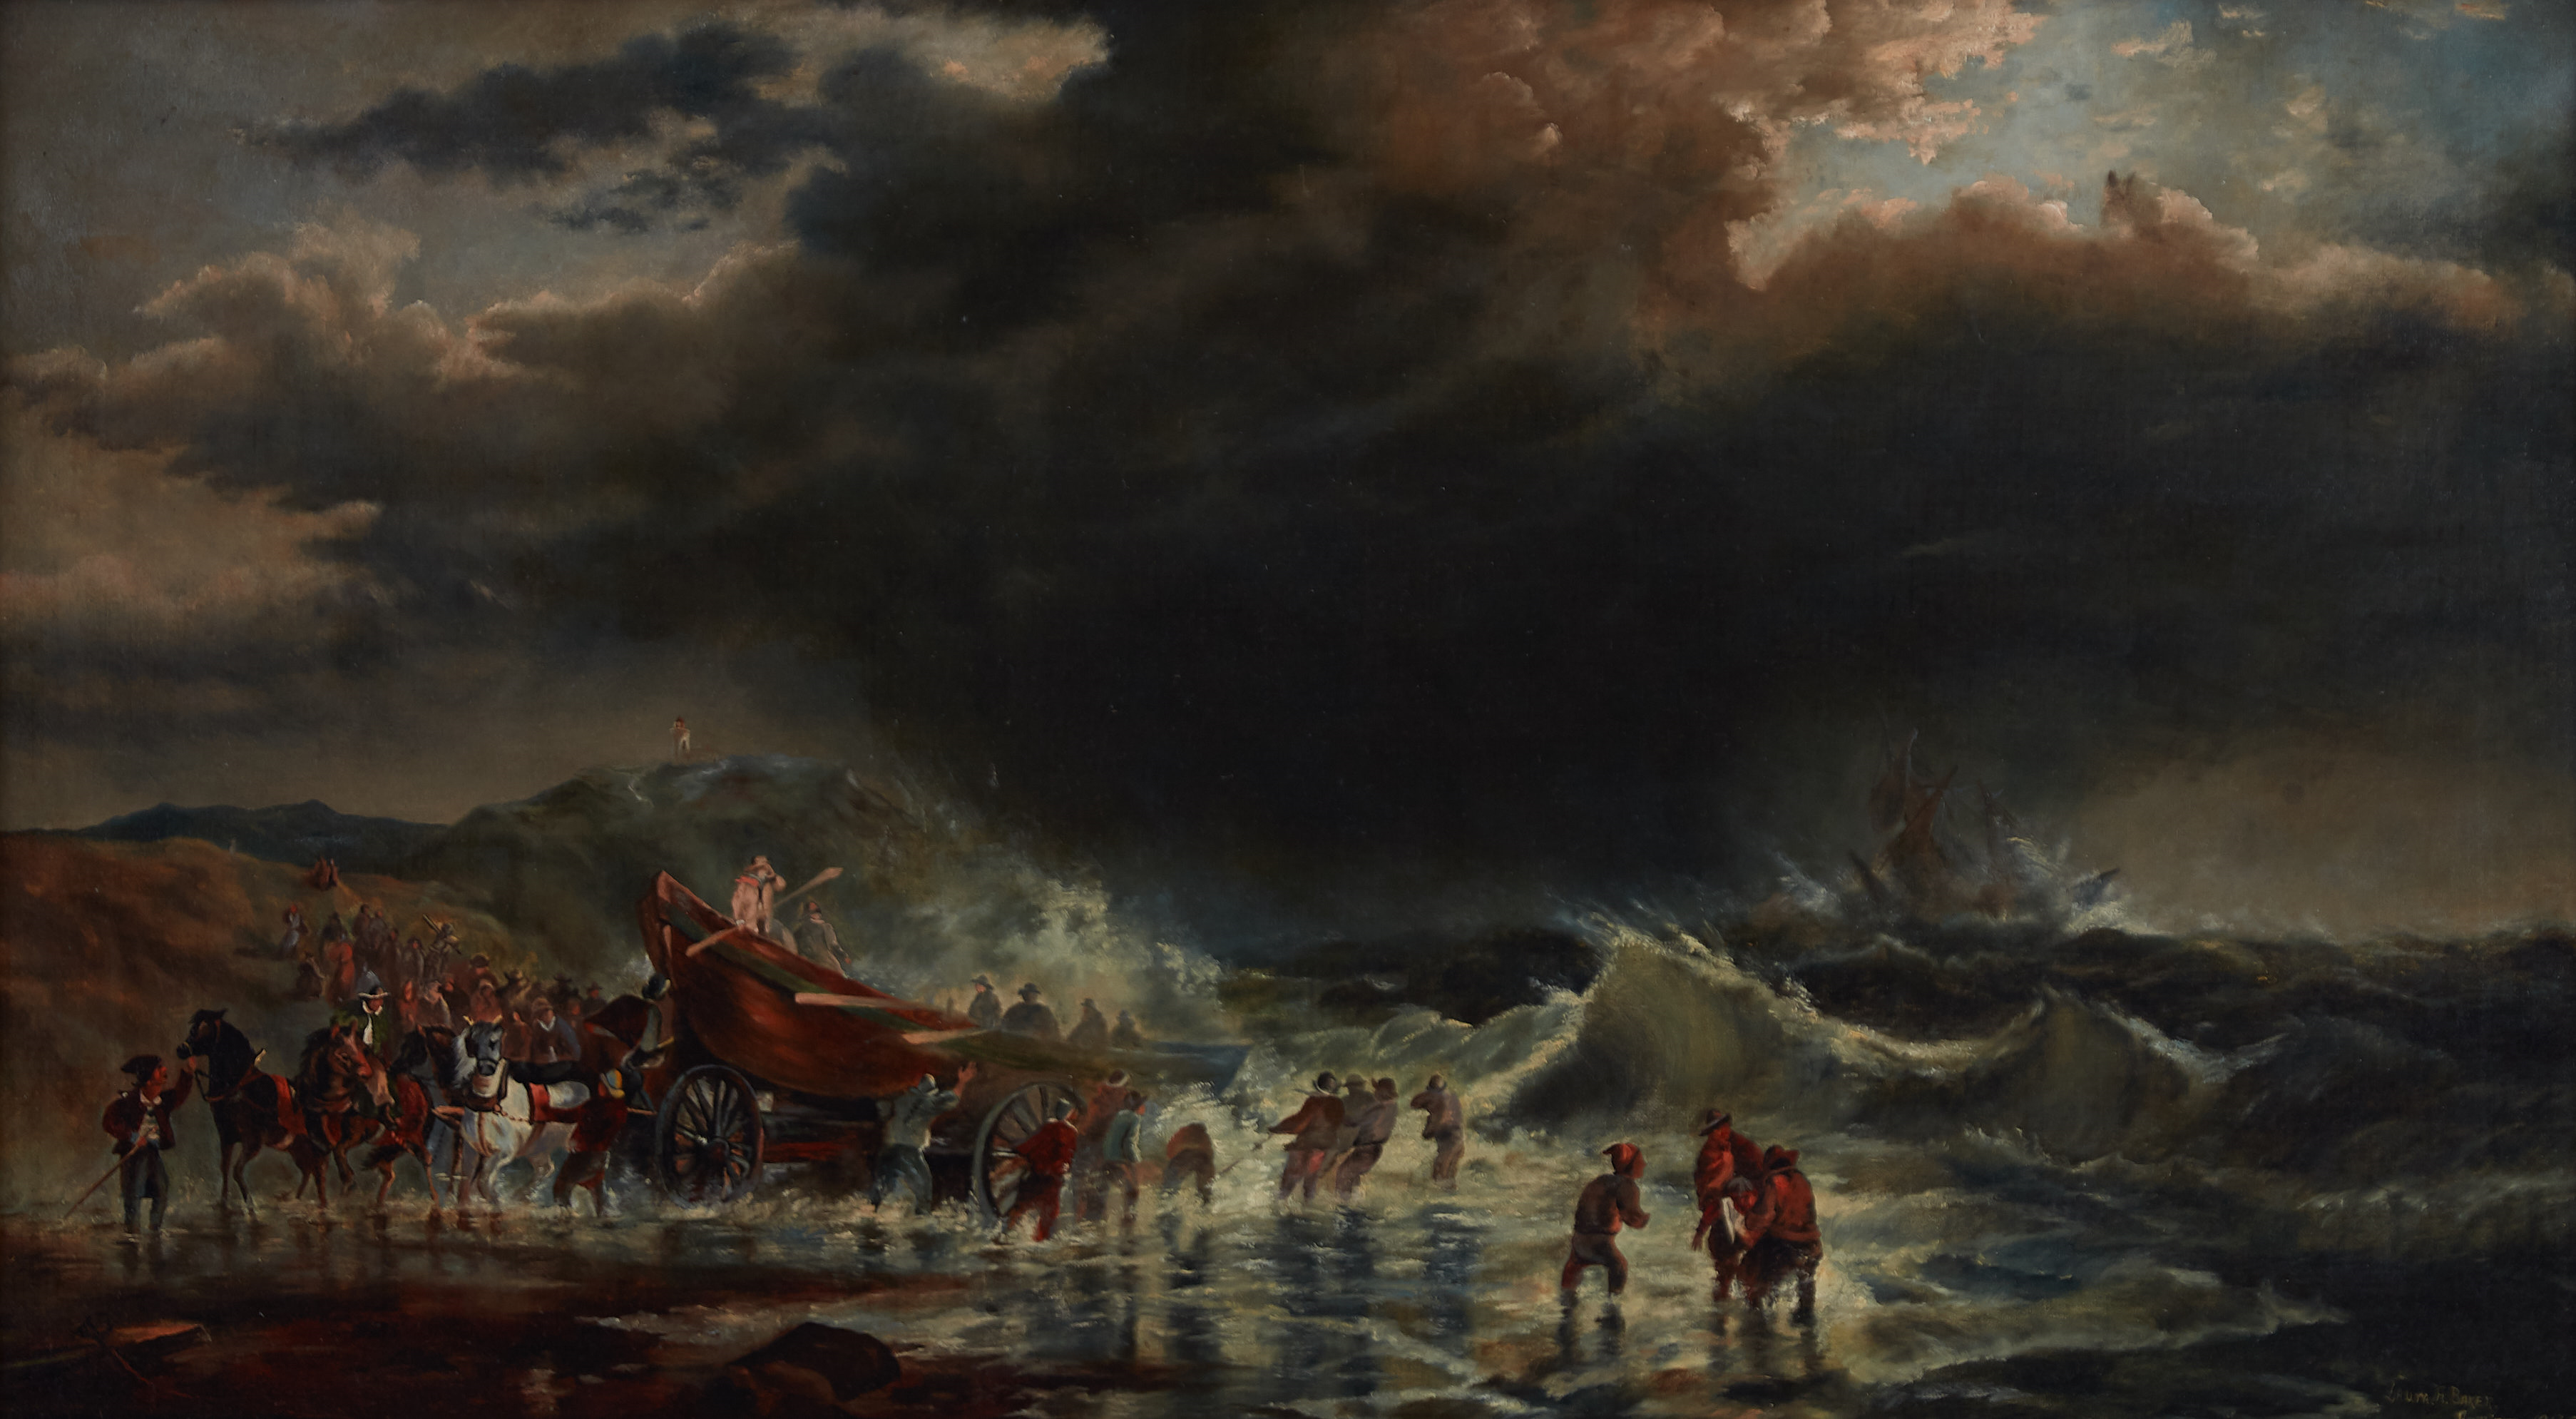 Lot 060: 1895 Laura A. Baker Shipwreck Oil on Canvas